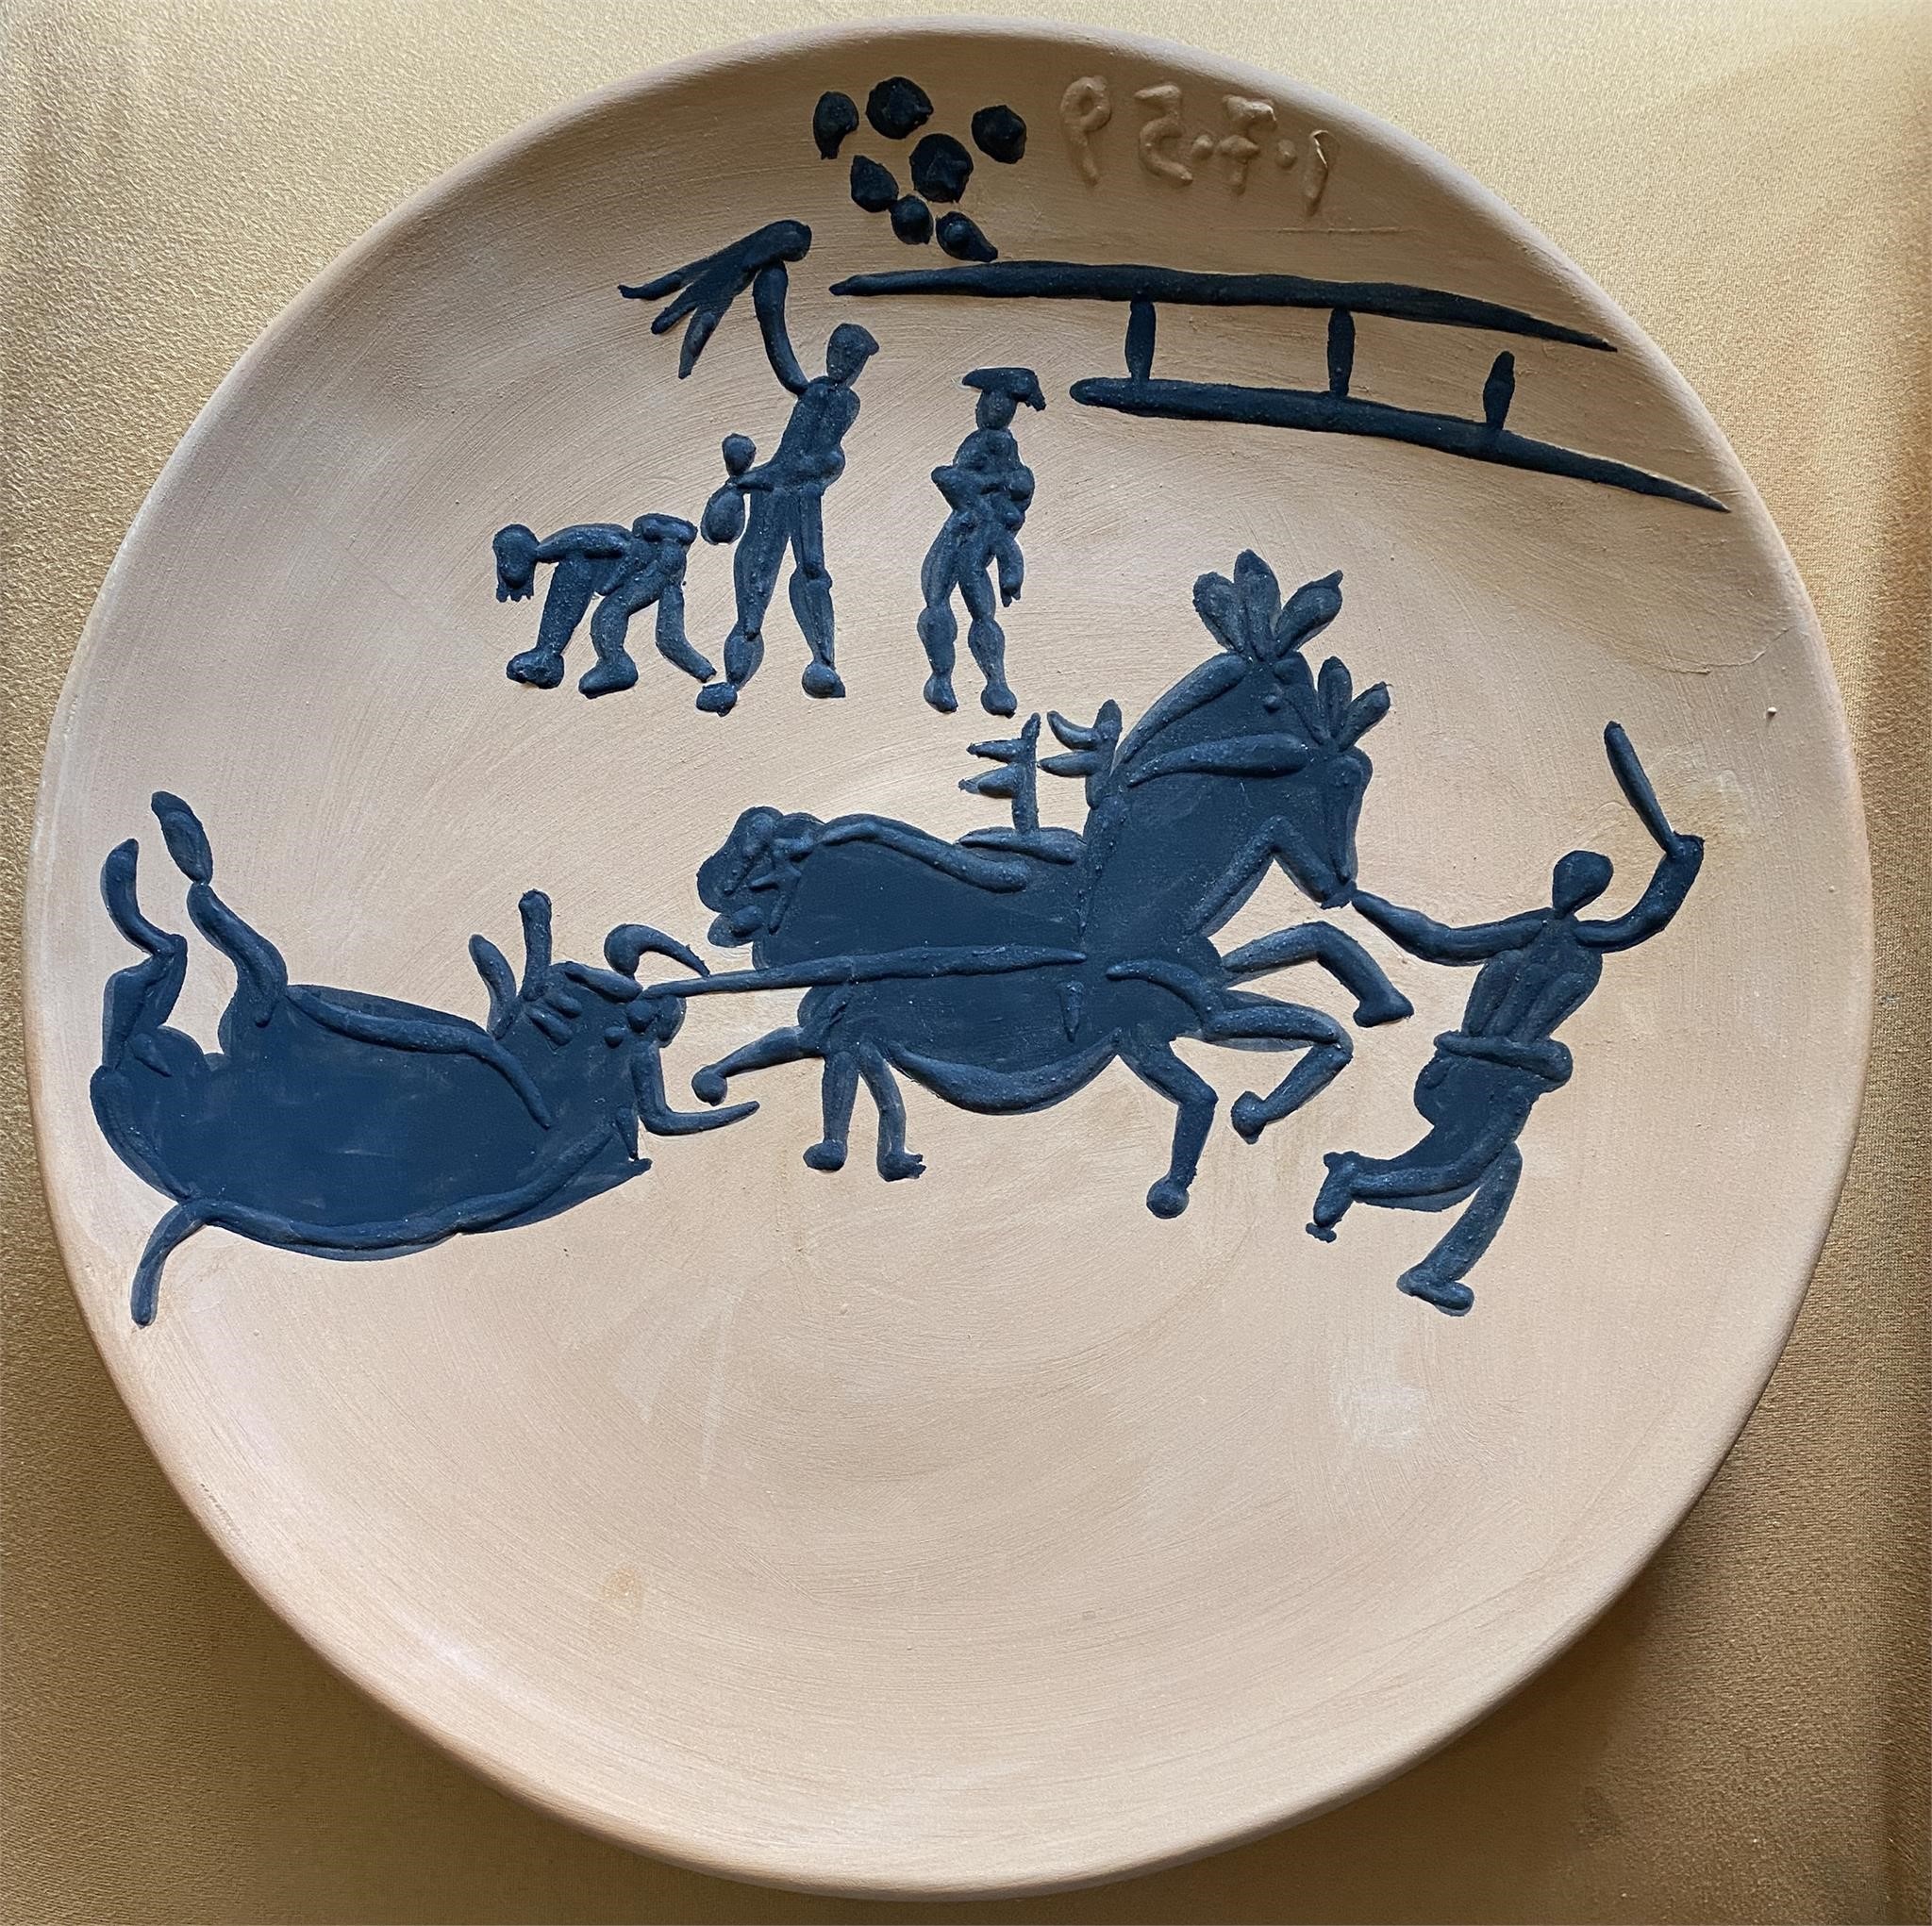 Pablo Picasso Limited Edition Ceramic Plate